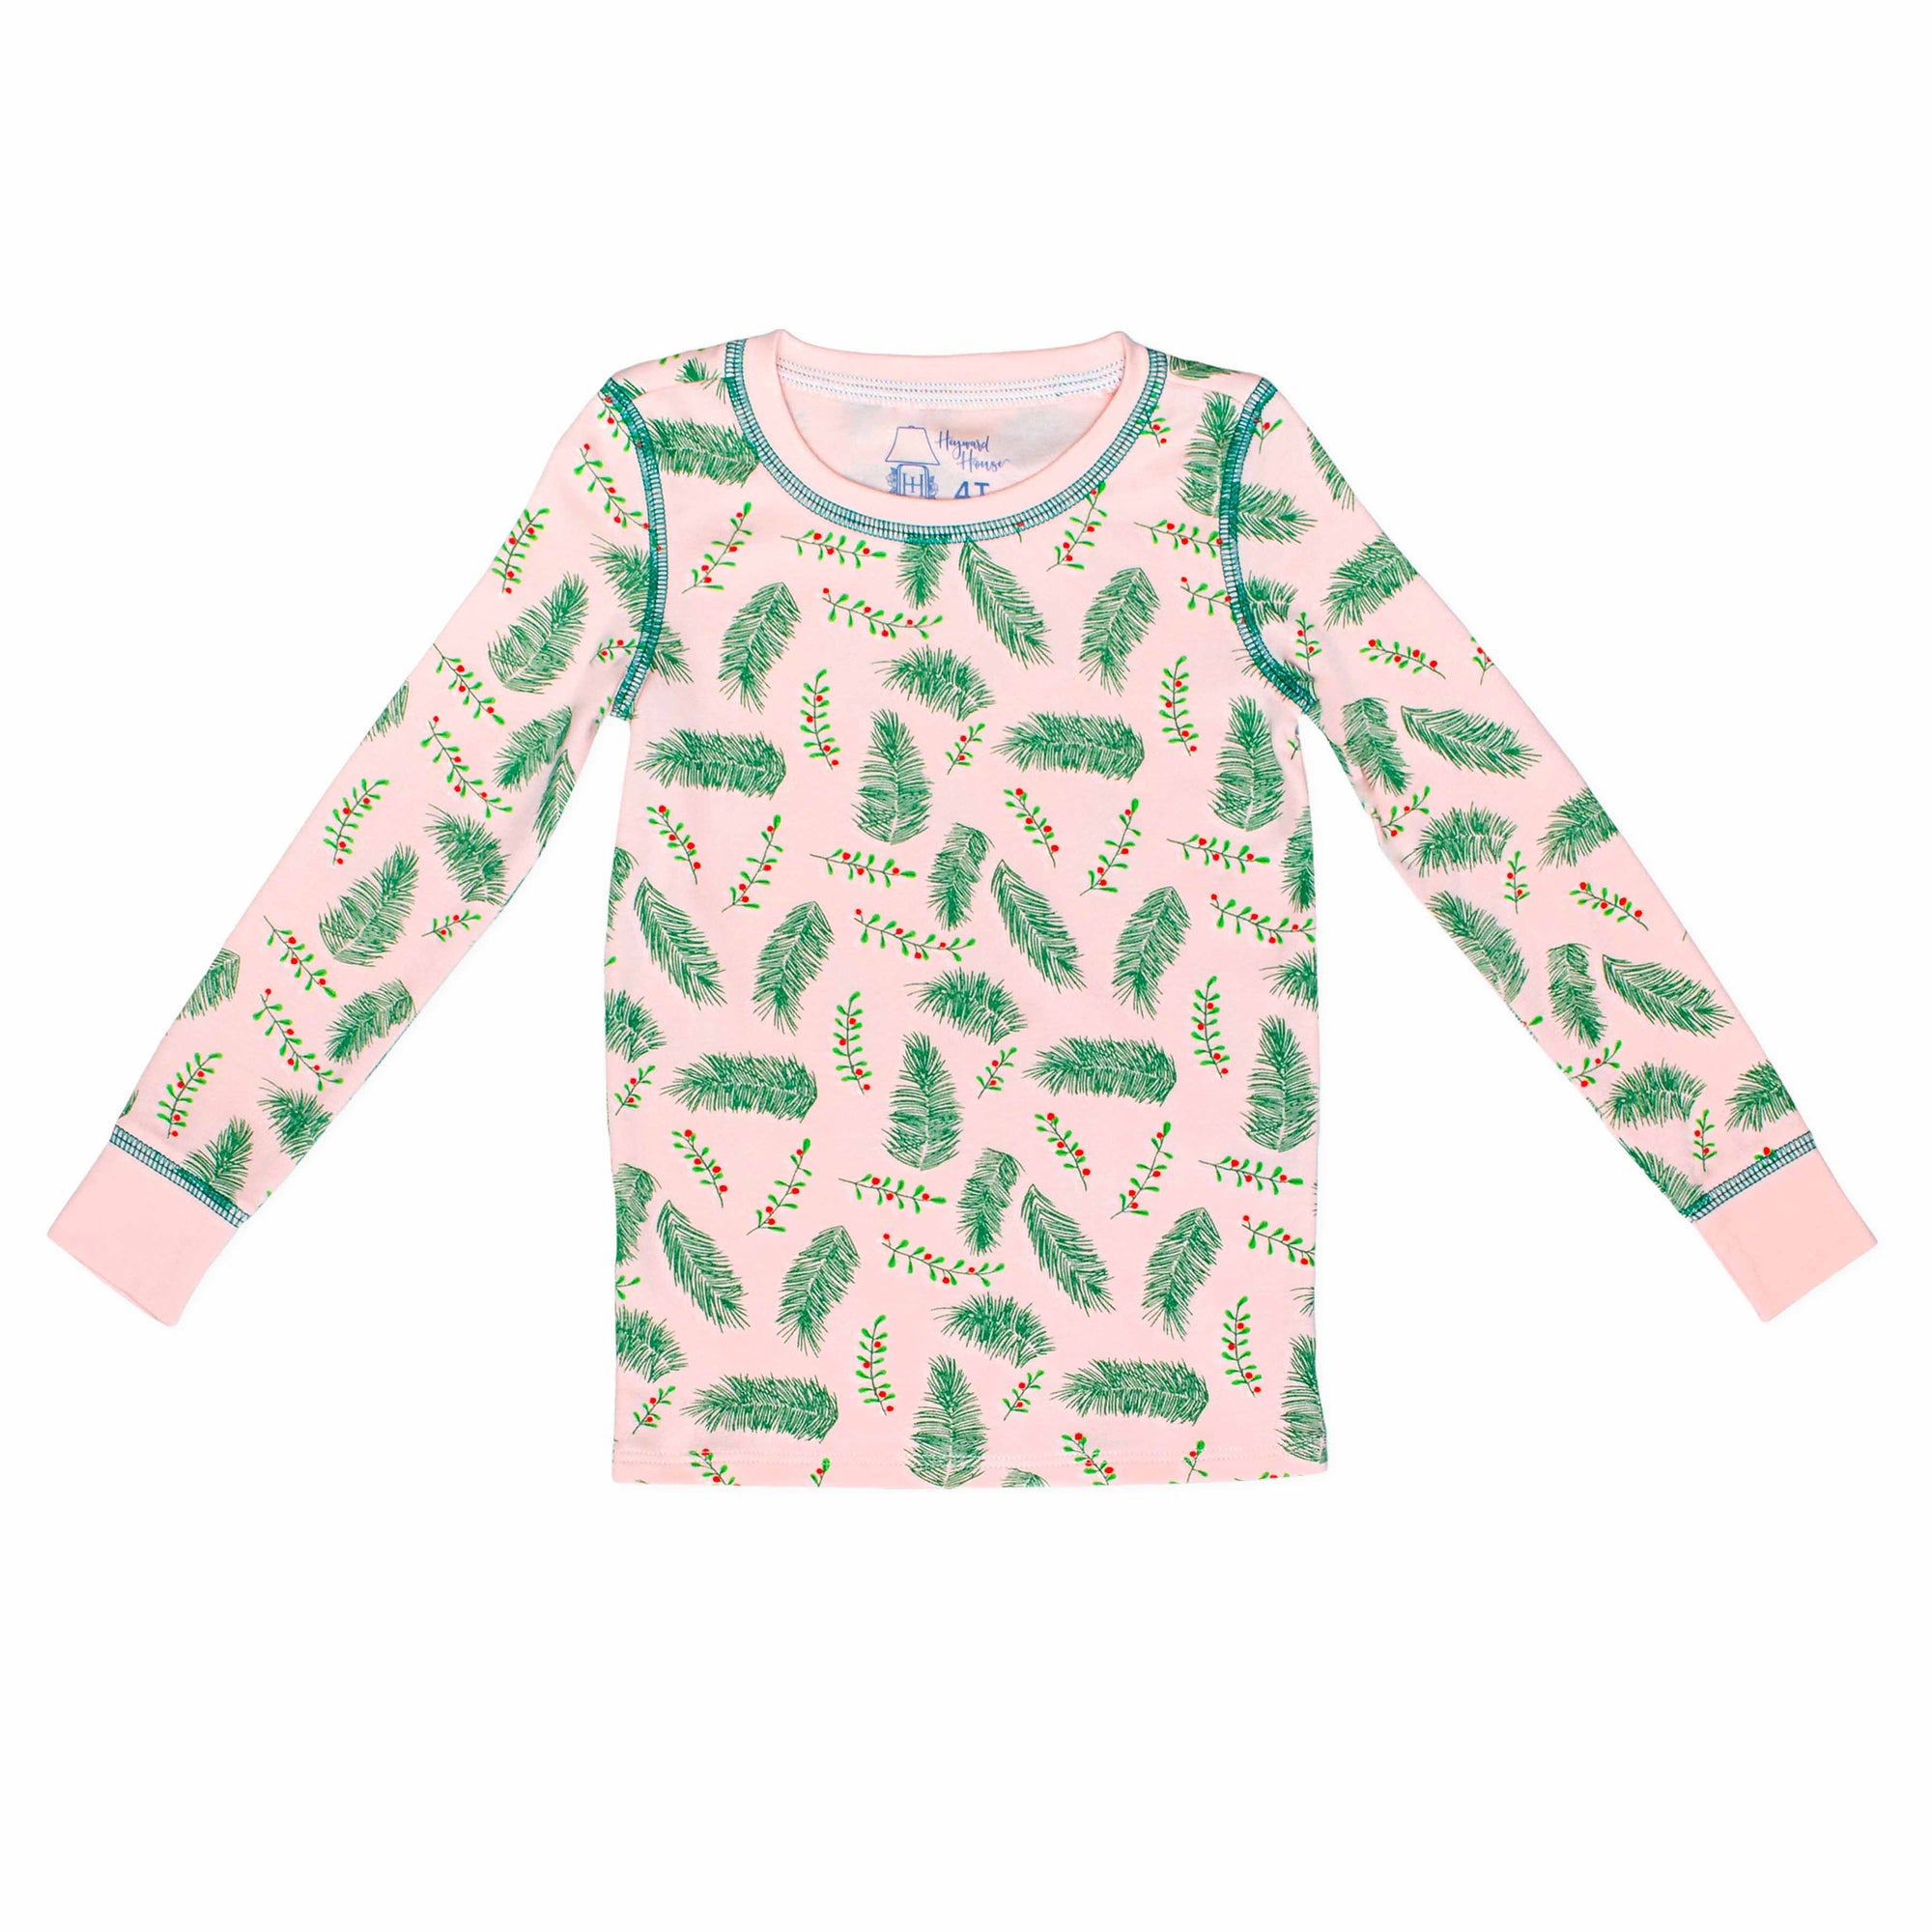 Pink two-piece pajama top with vintage Christmas holly pattern made with pima cotton